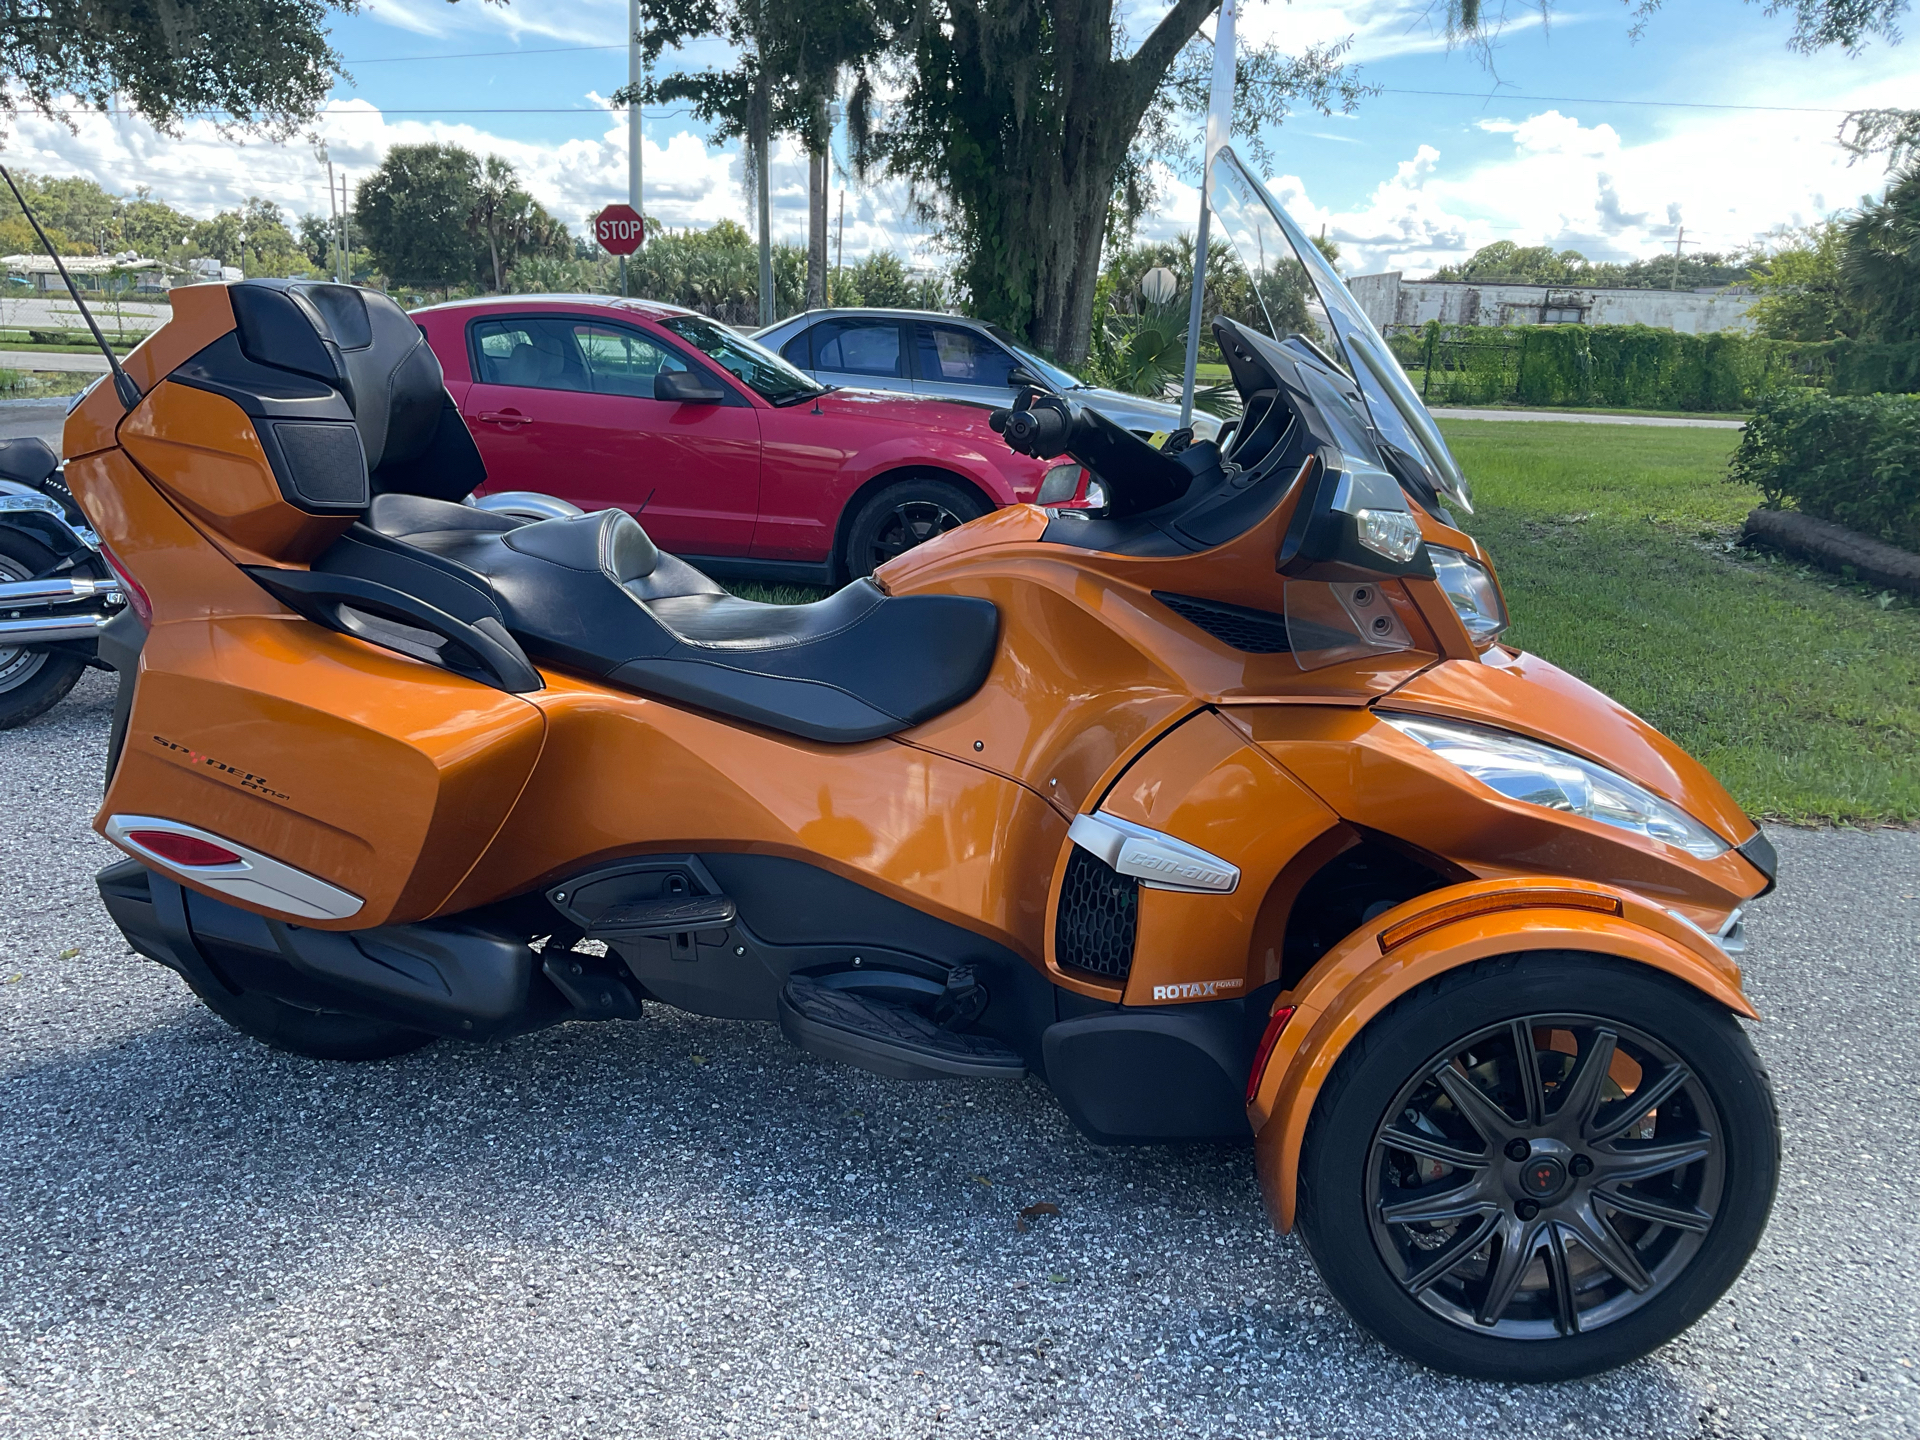 2014 Can-Am Spyder® RT-S SE6 in Sanford, Florida - Photo 1